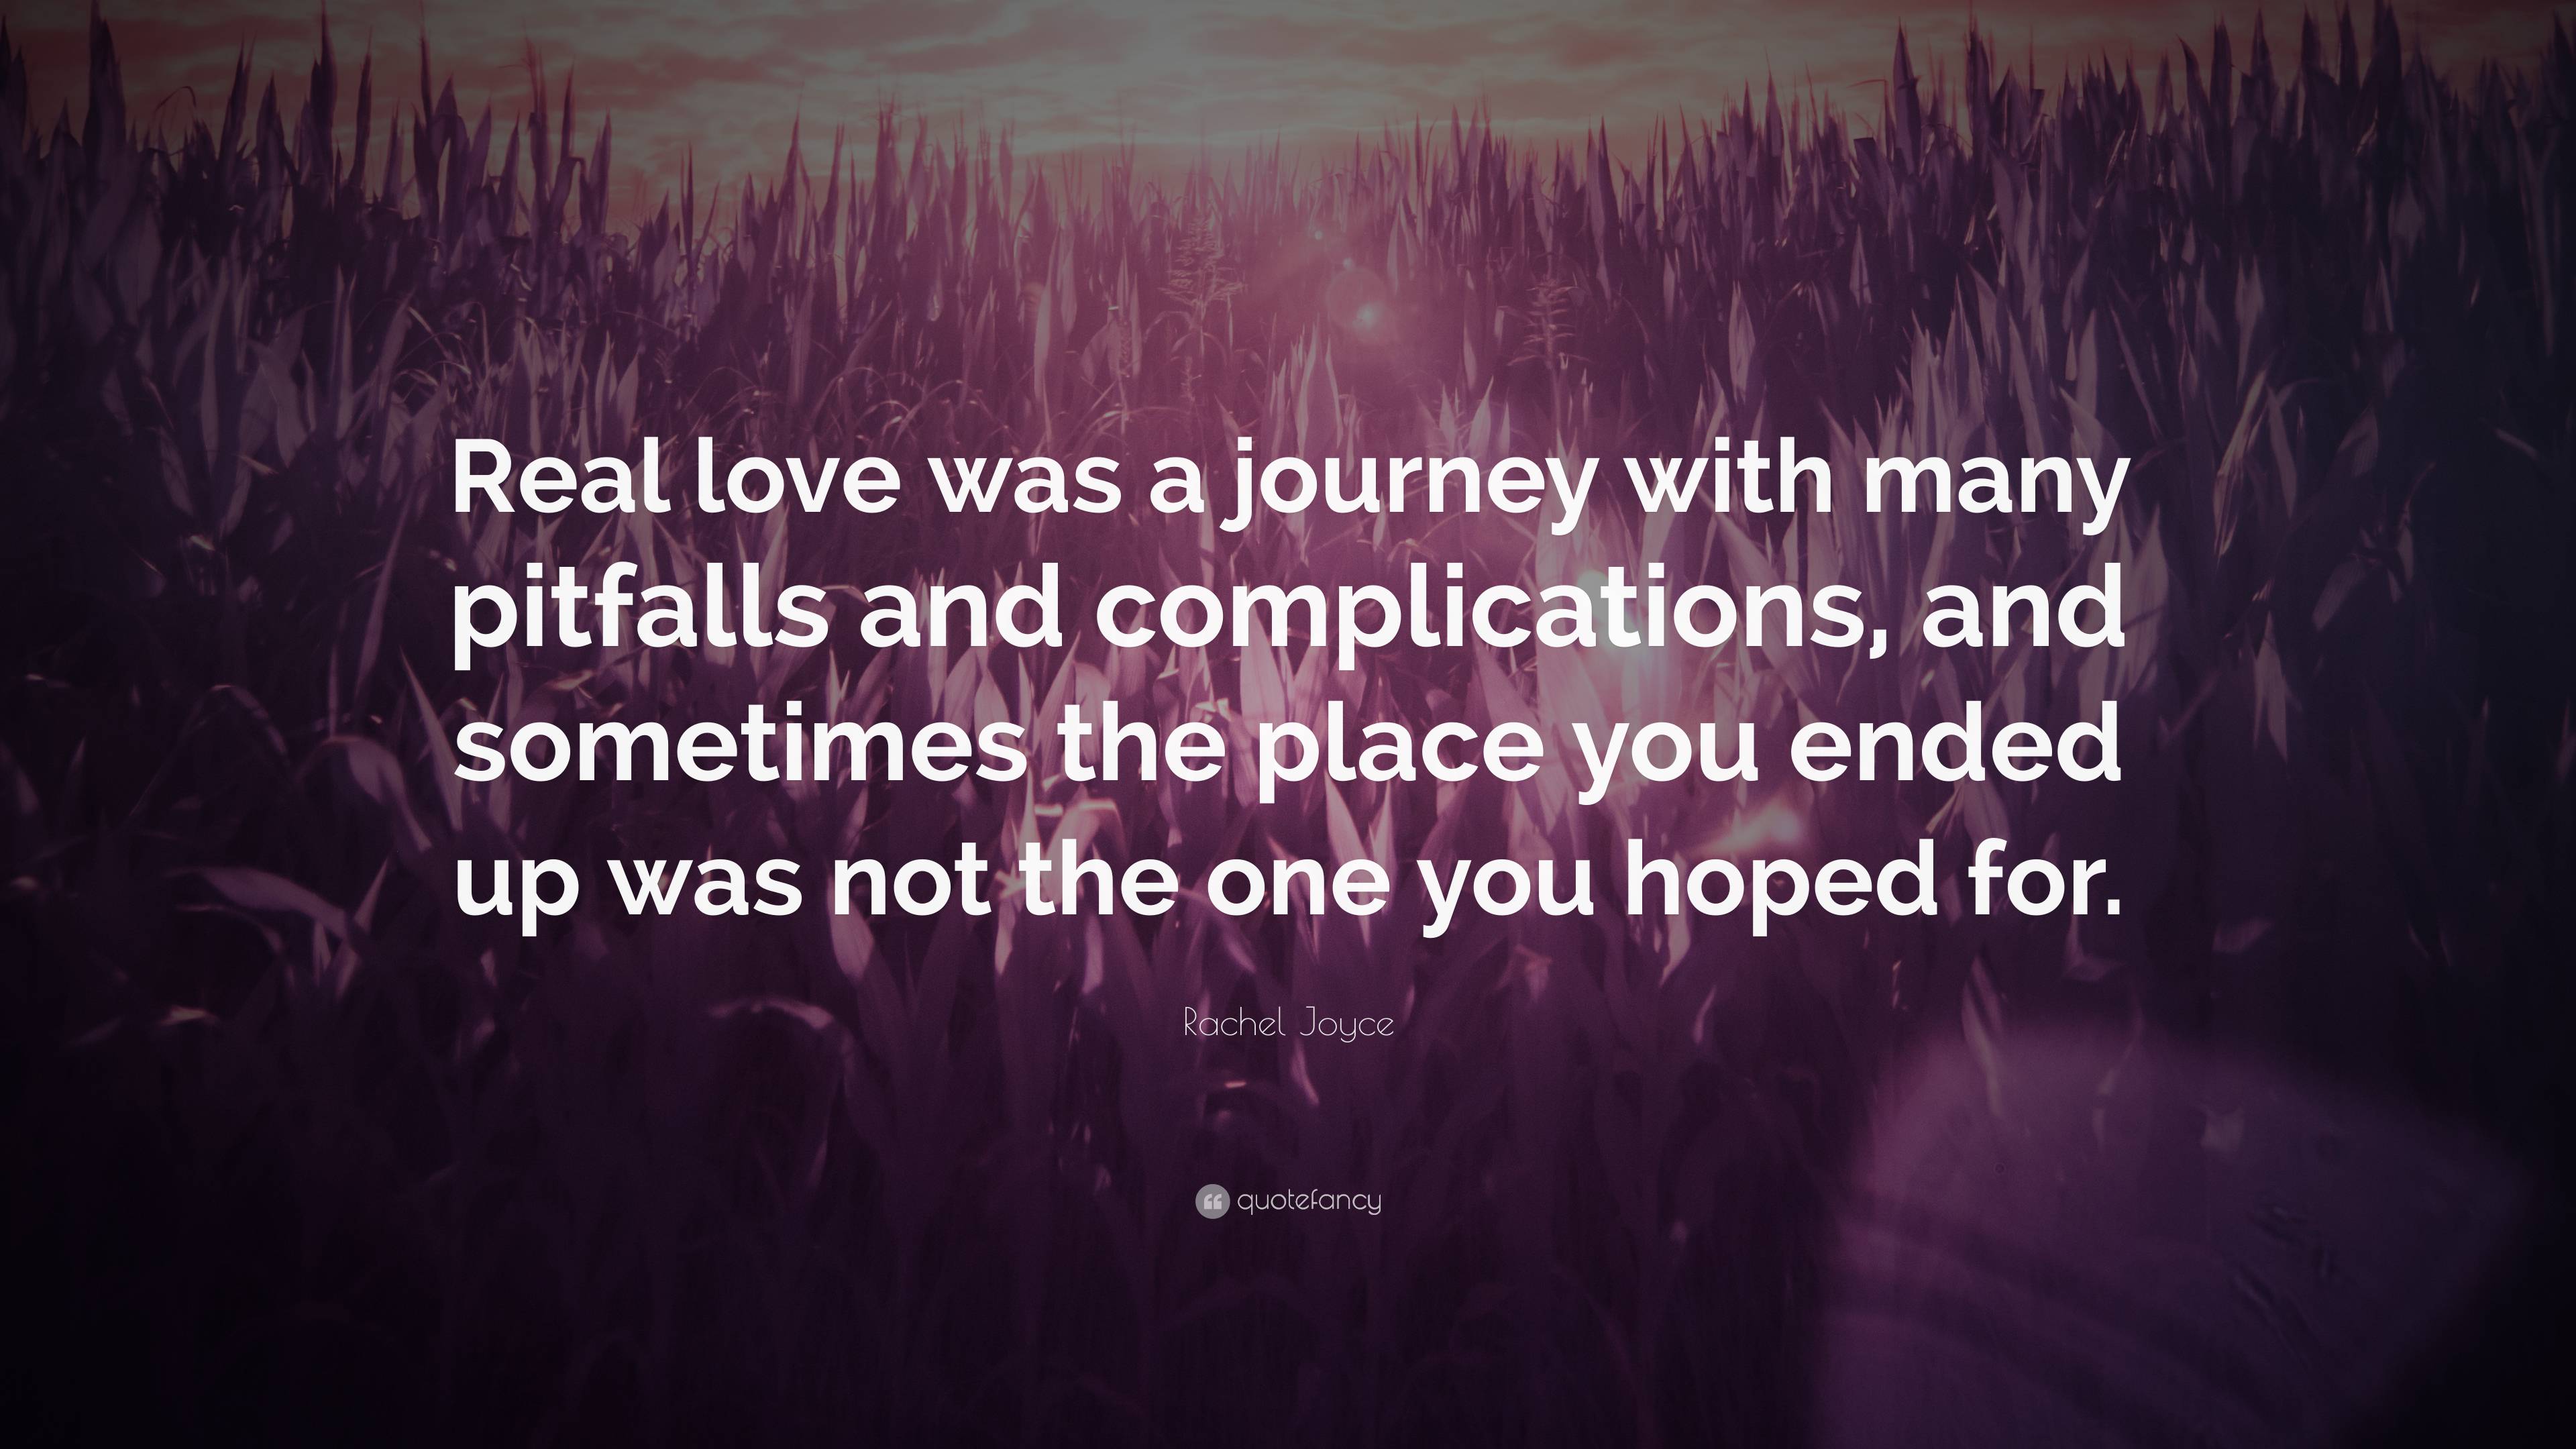 https://quotefancy.com/media/wallpaper/3840x2160/7314522-Rachel-Joyce-Quote-Real-love-was-a-journey-with-many-pitfalls-and.jpg